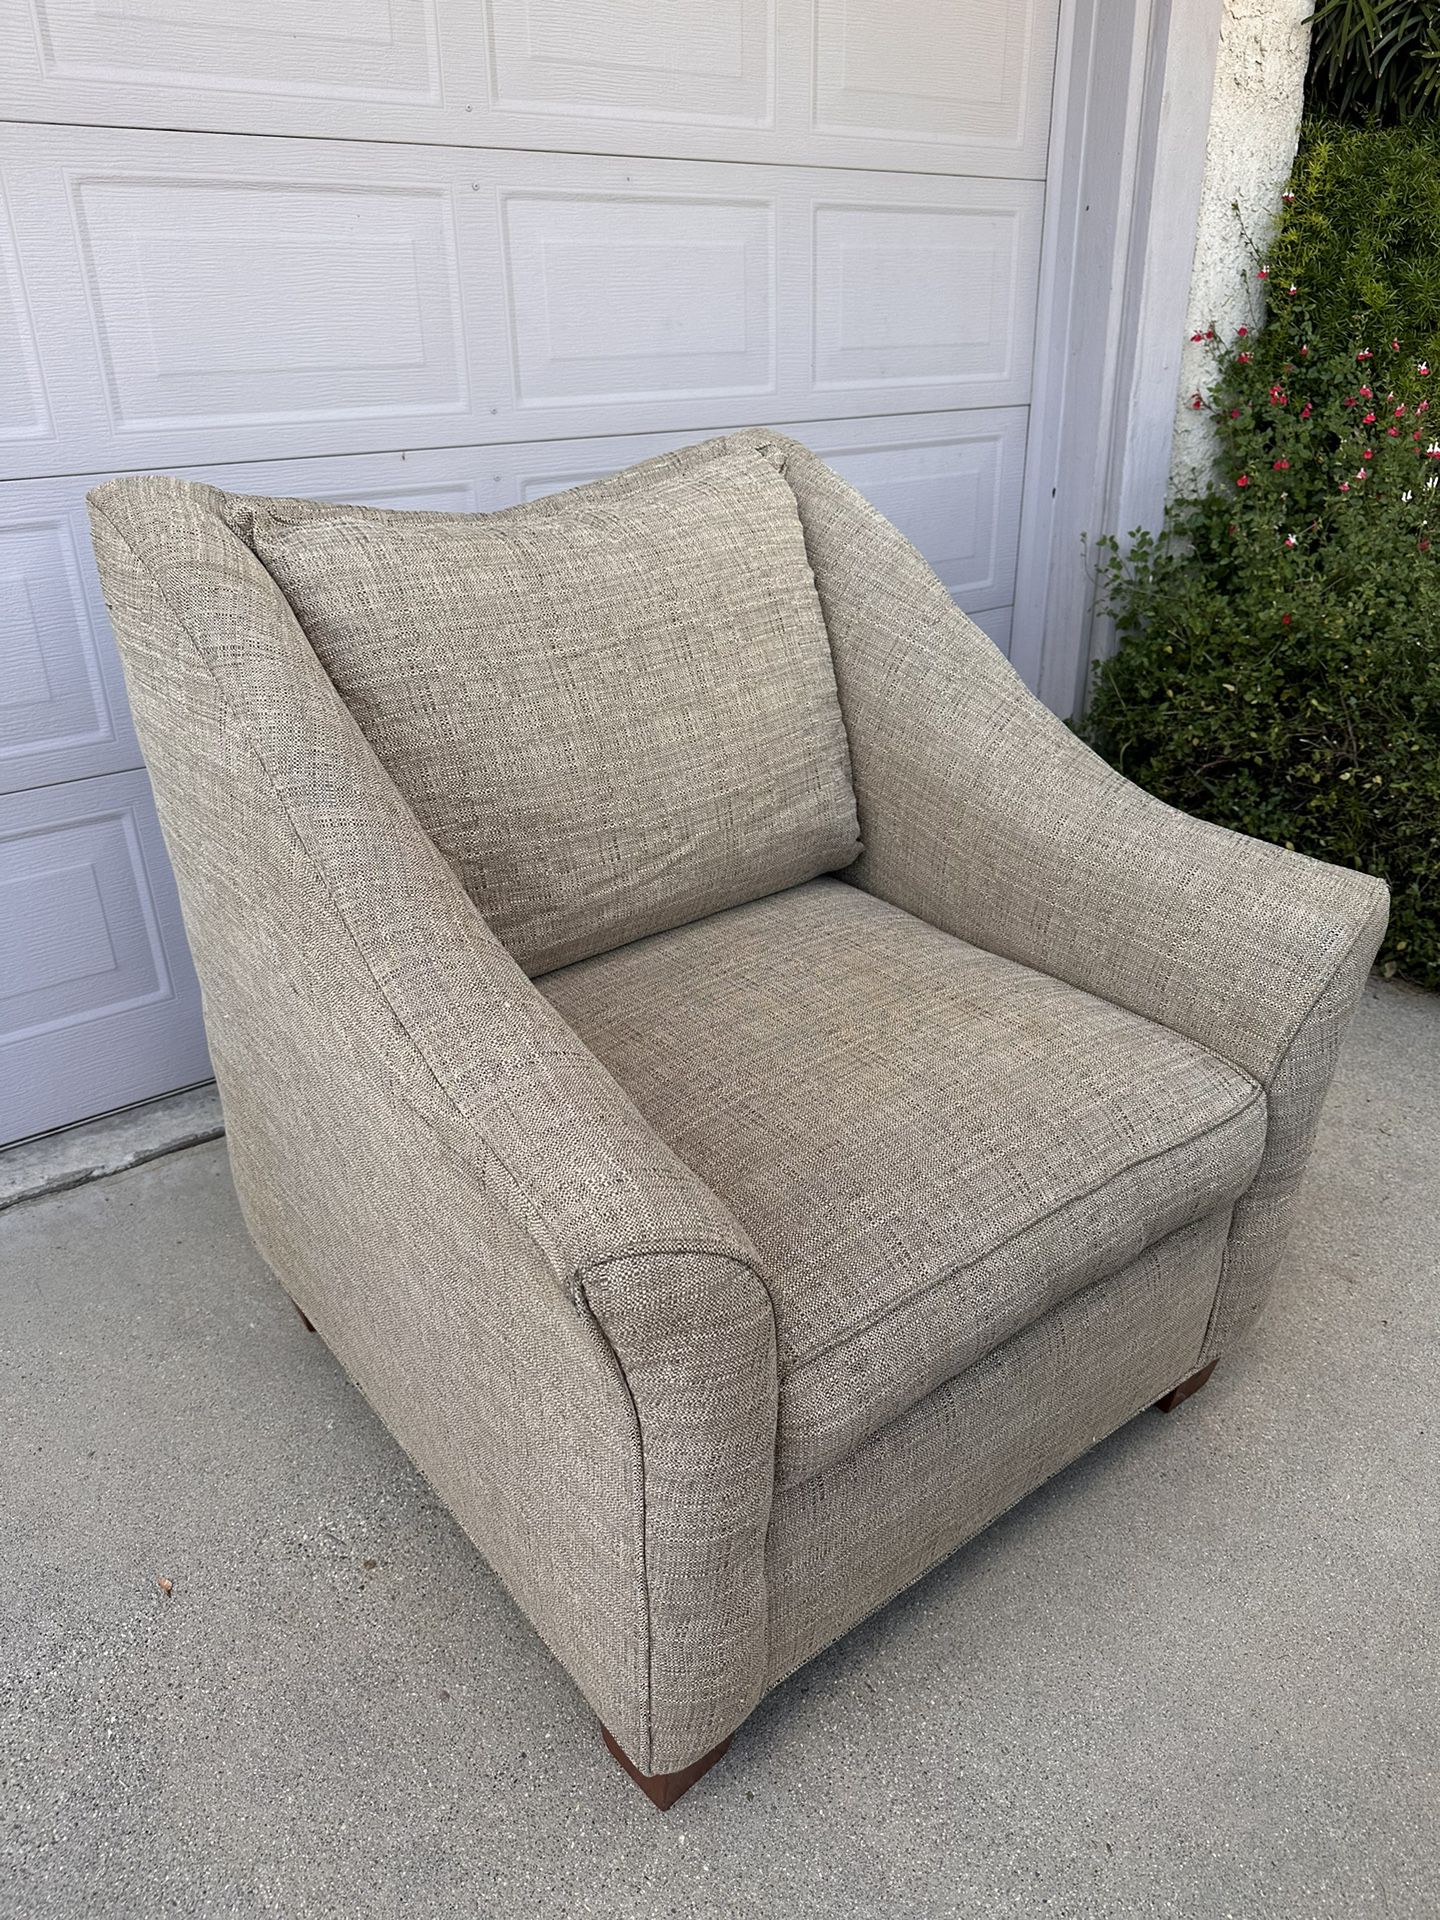 Large Armchair ($75) OBO